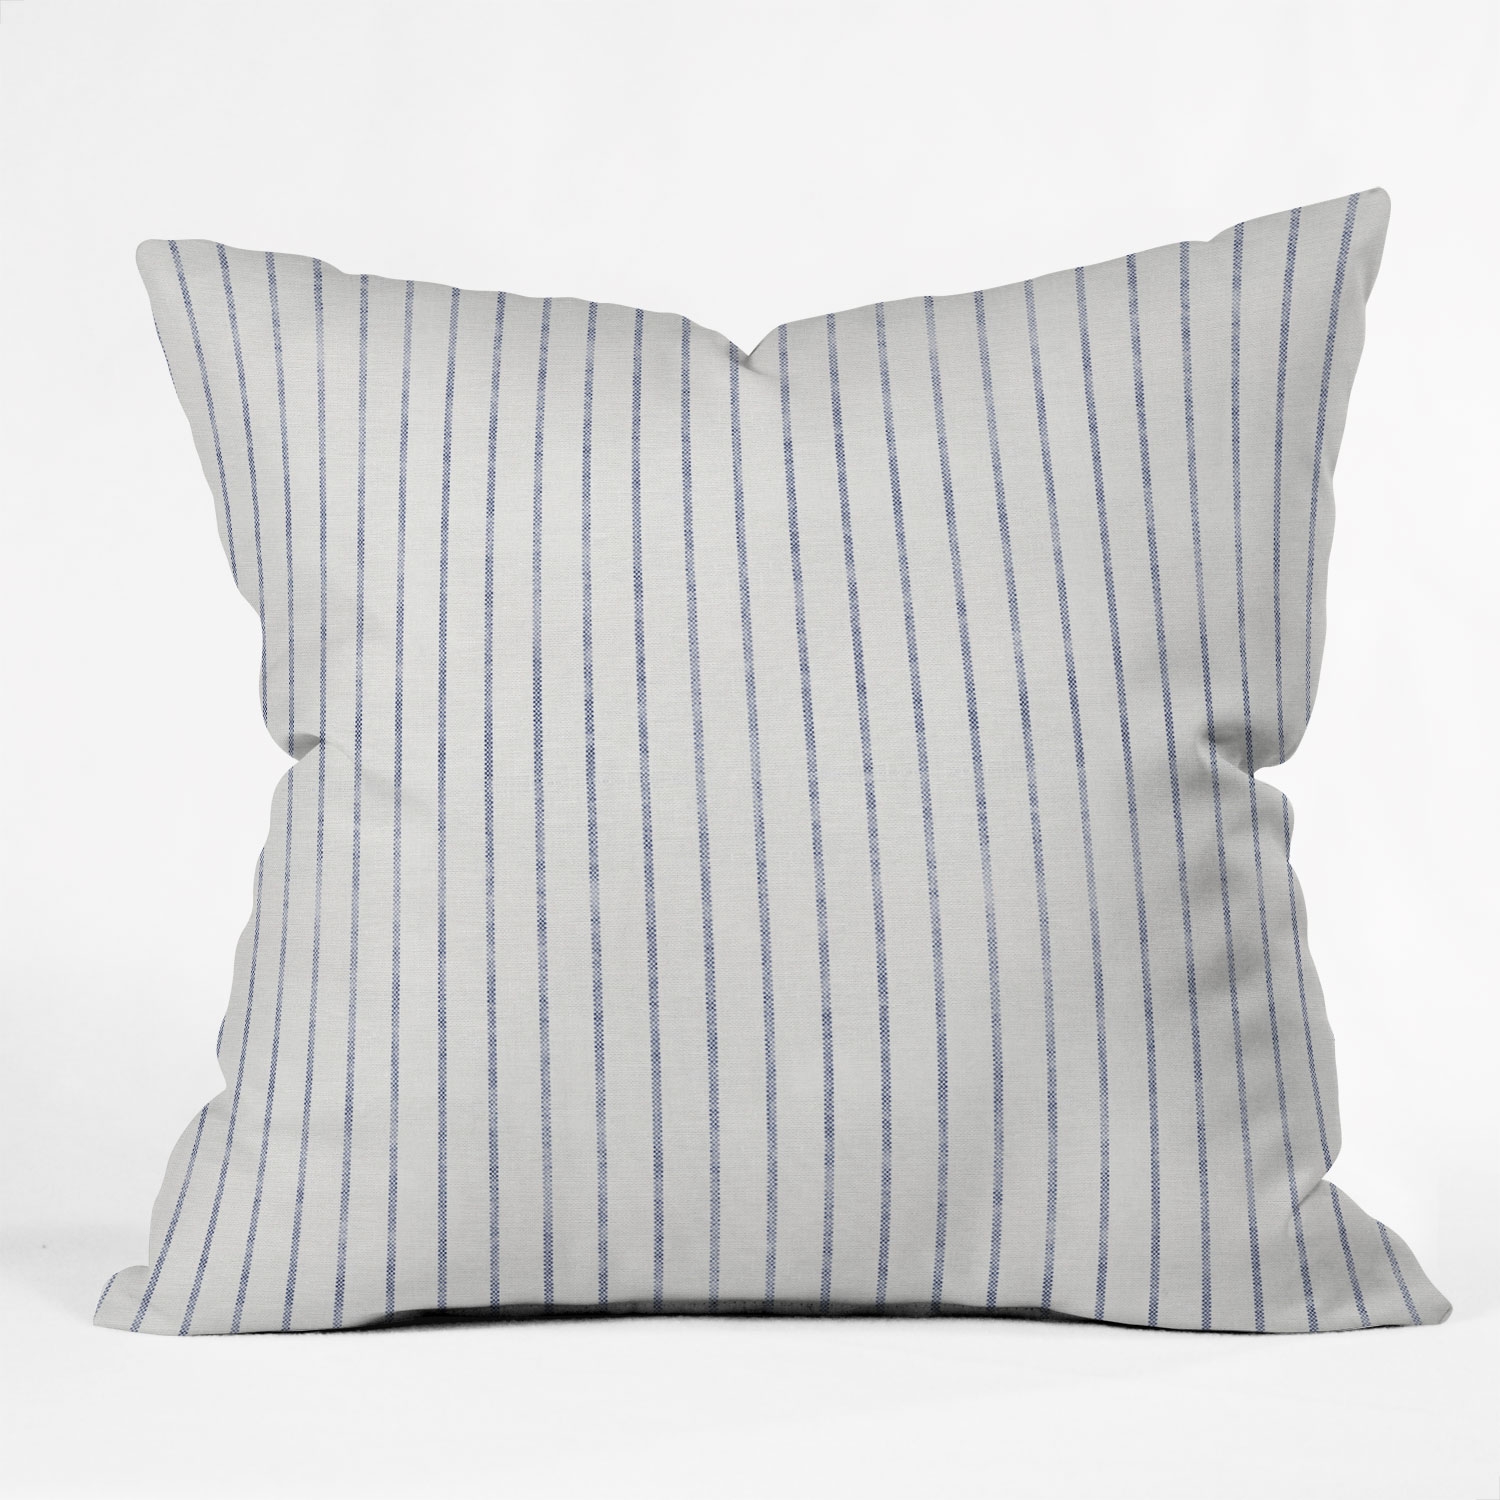 Aegean Wide Stripe by Holli Zollinger - Outdoor Throw Pillow 20" x 20" - Image 1